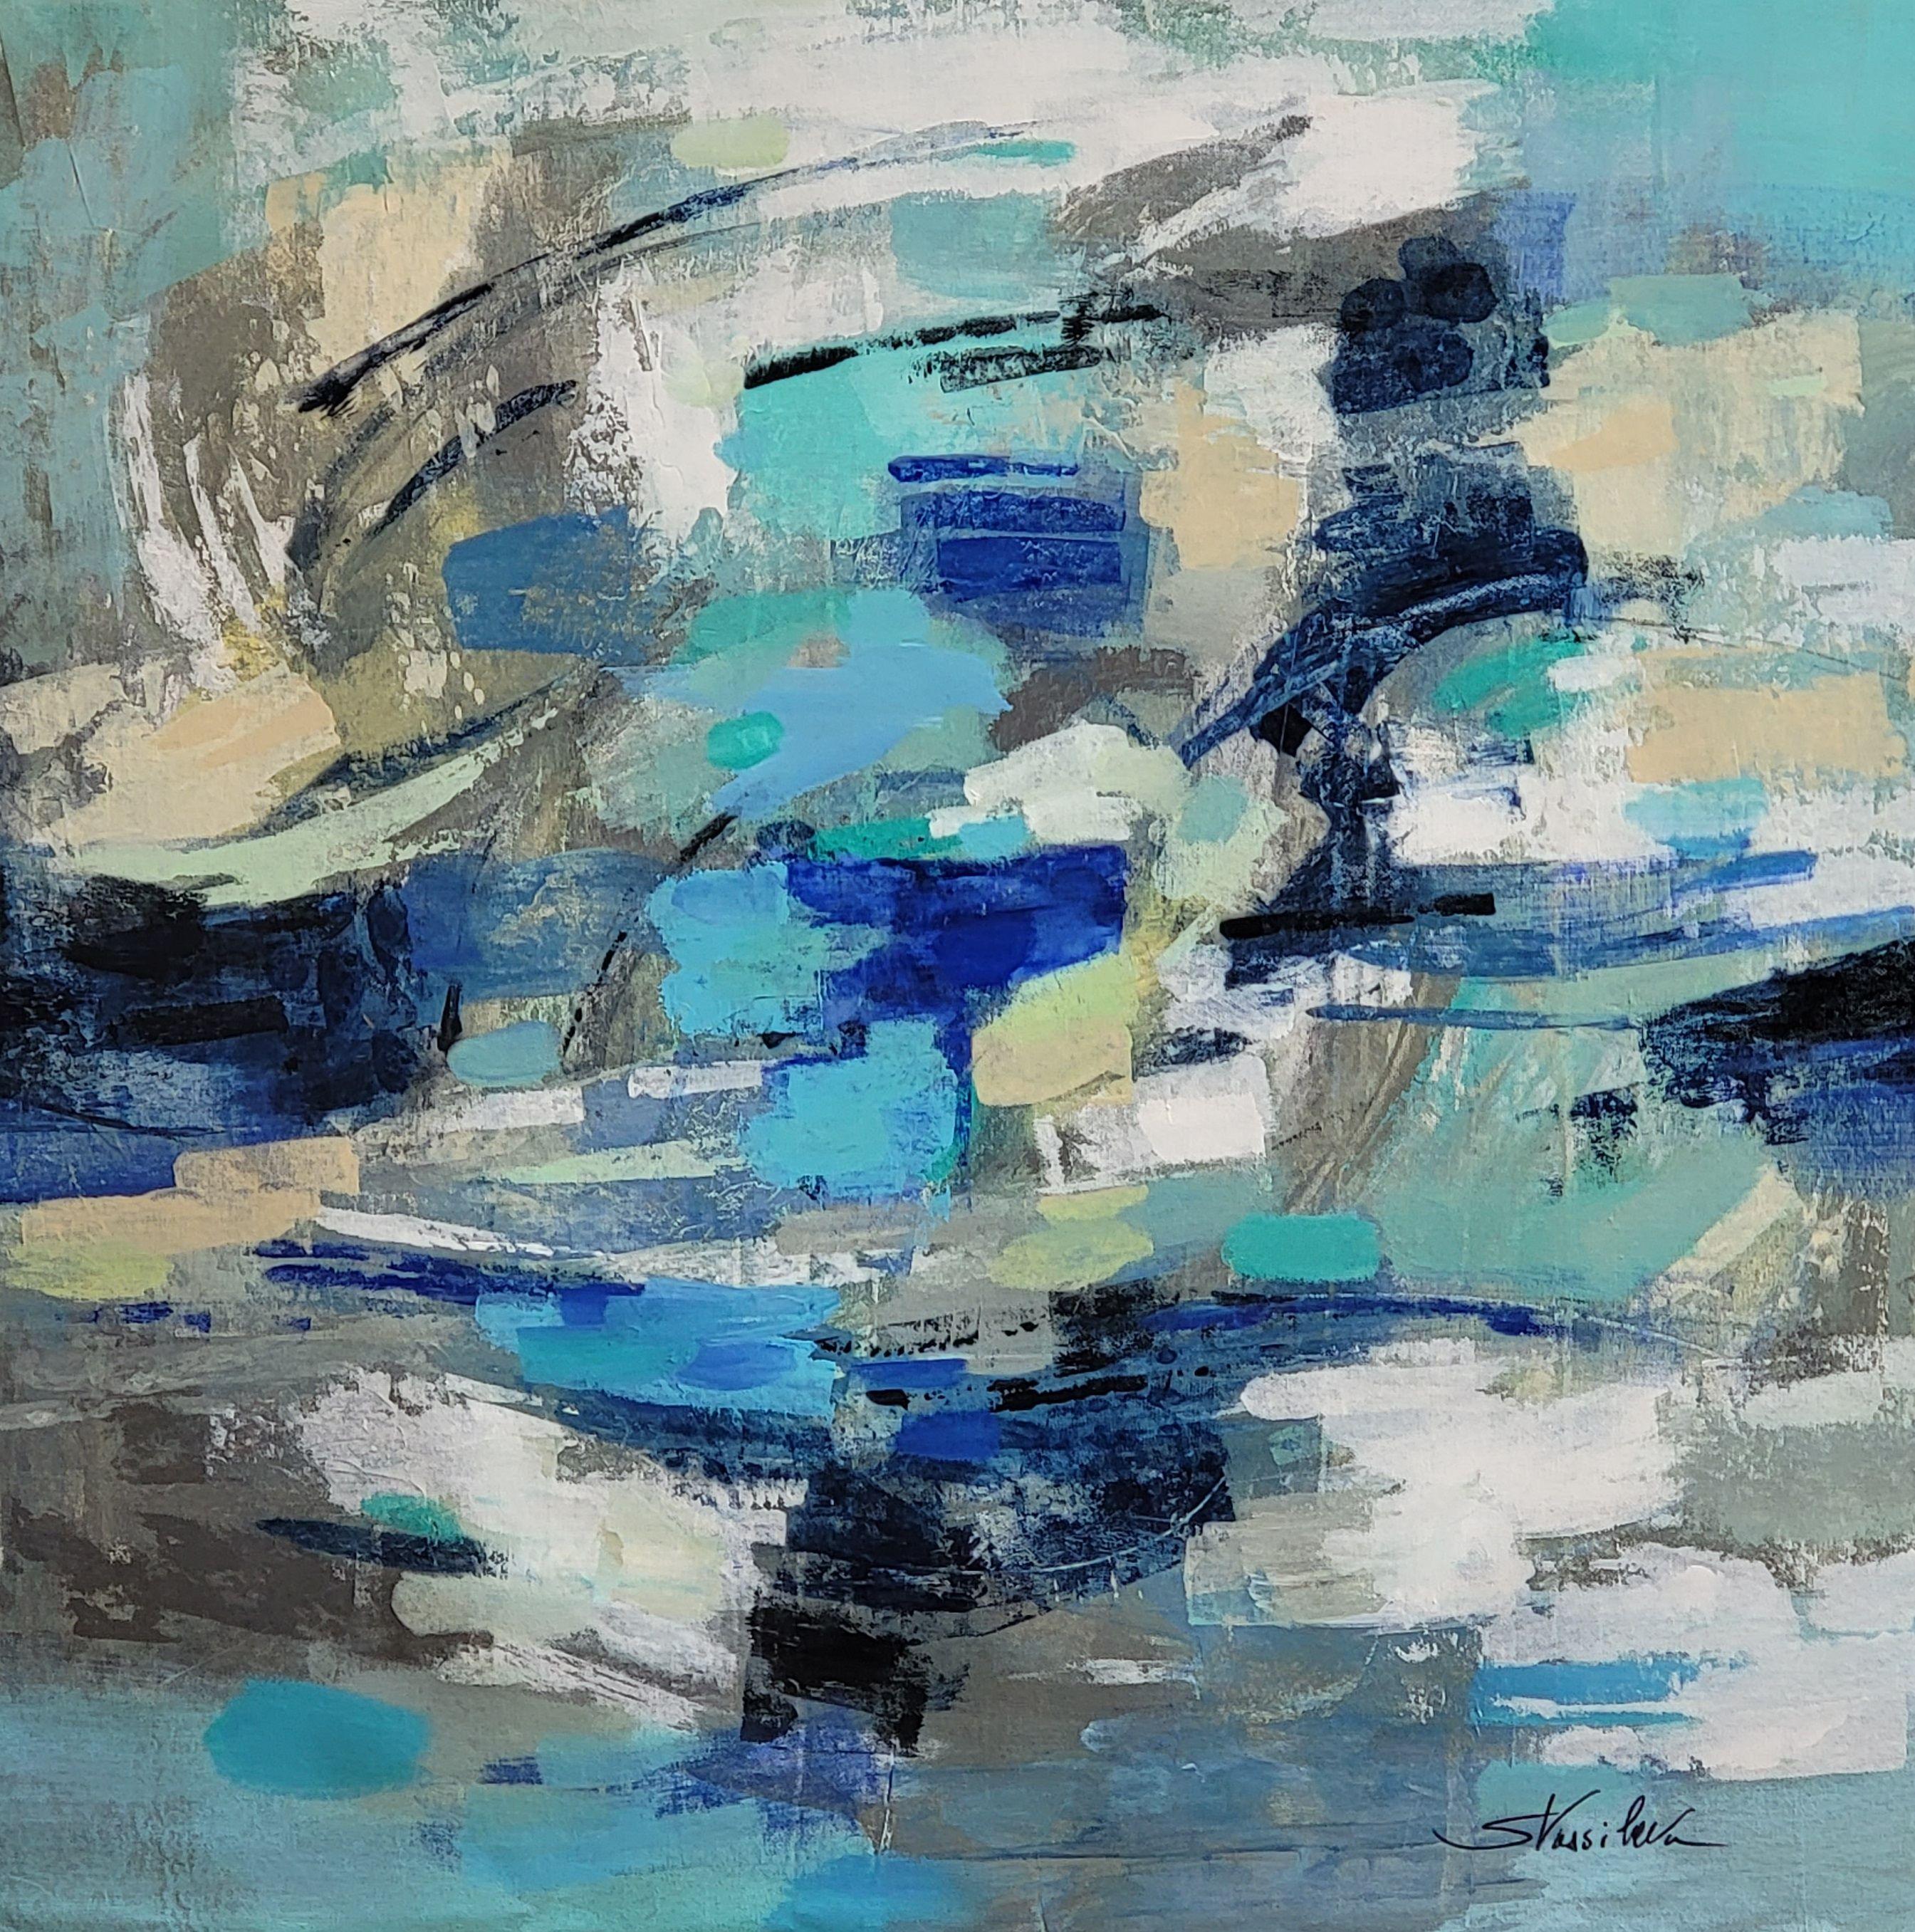 silvia vassileva Abstract Painting - Unexpected Wave, Painting, Acrylic on Canvas